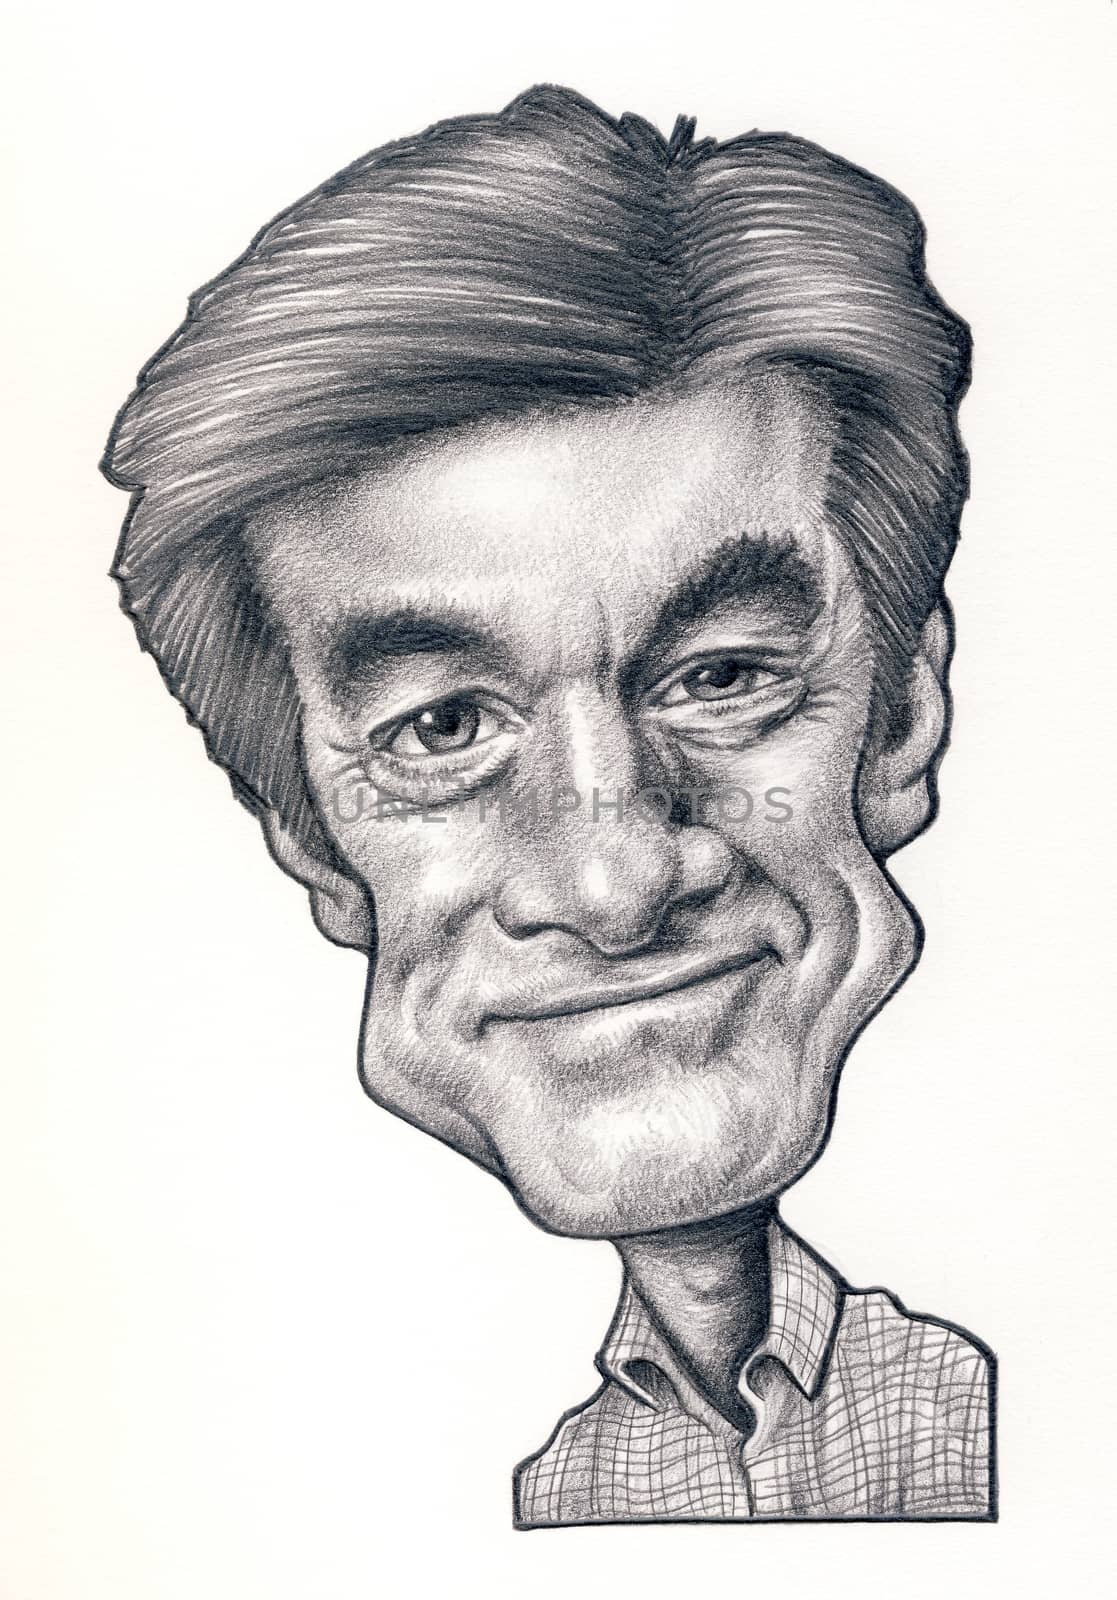 Dr. Oz graphite caricature drawing on a white background